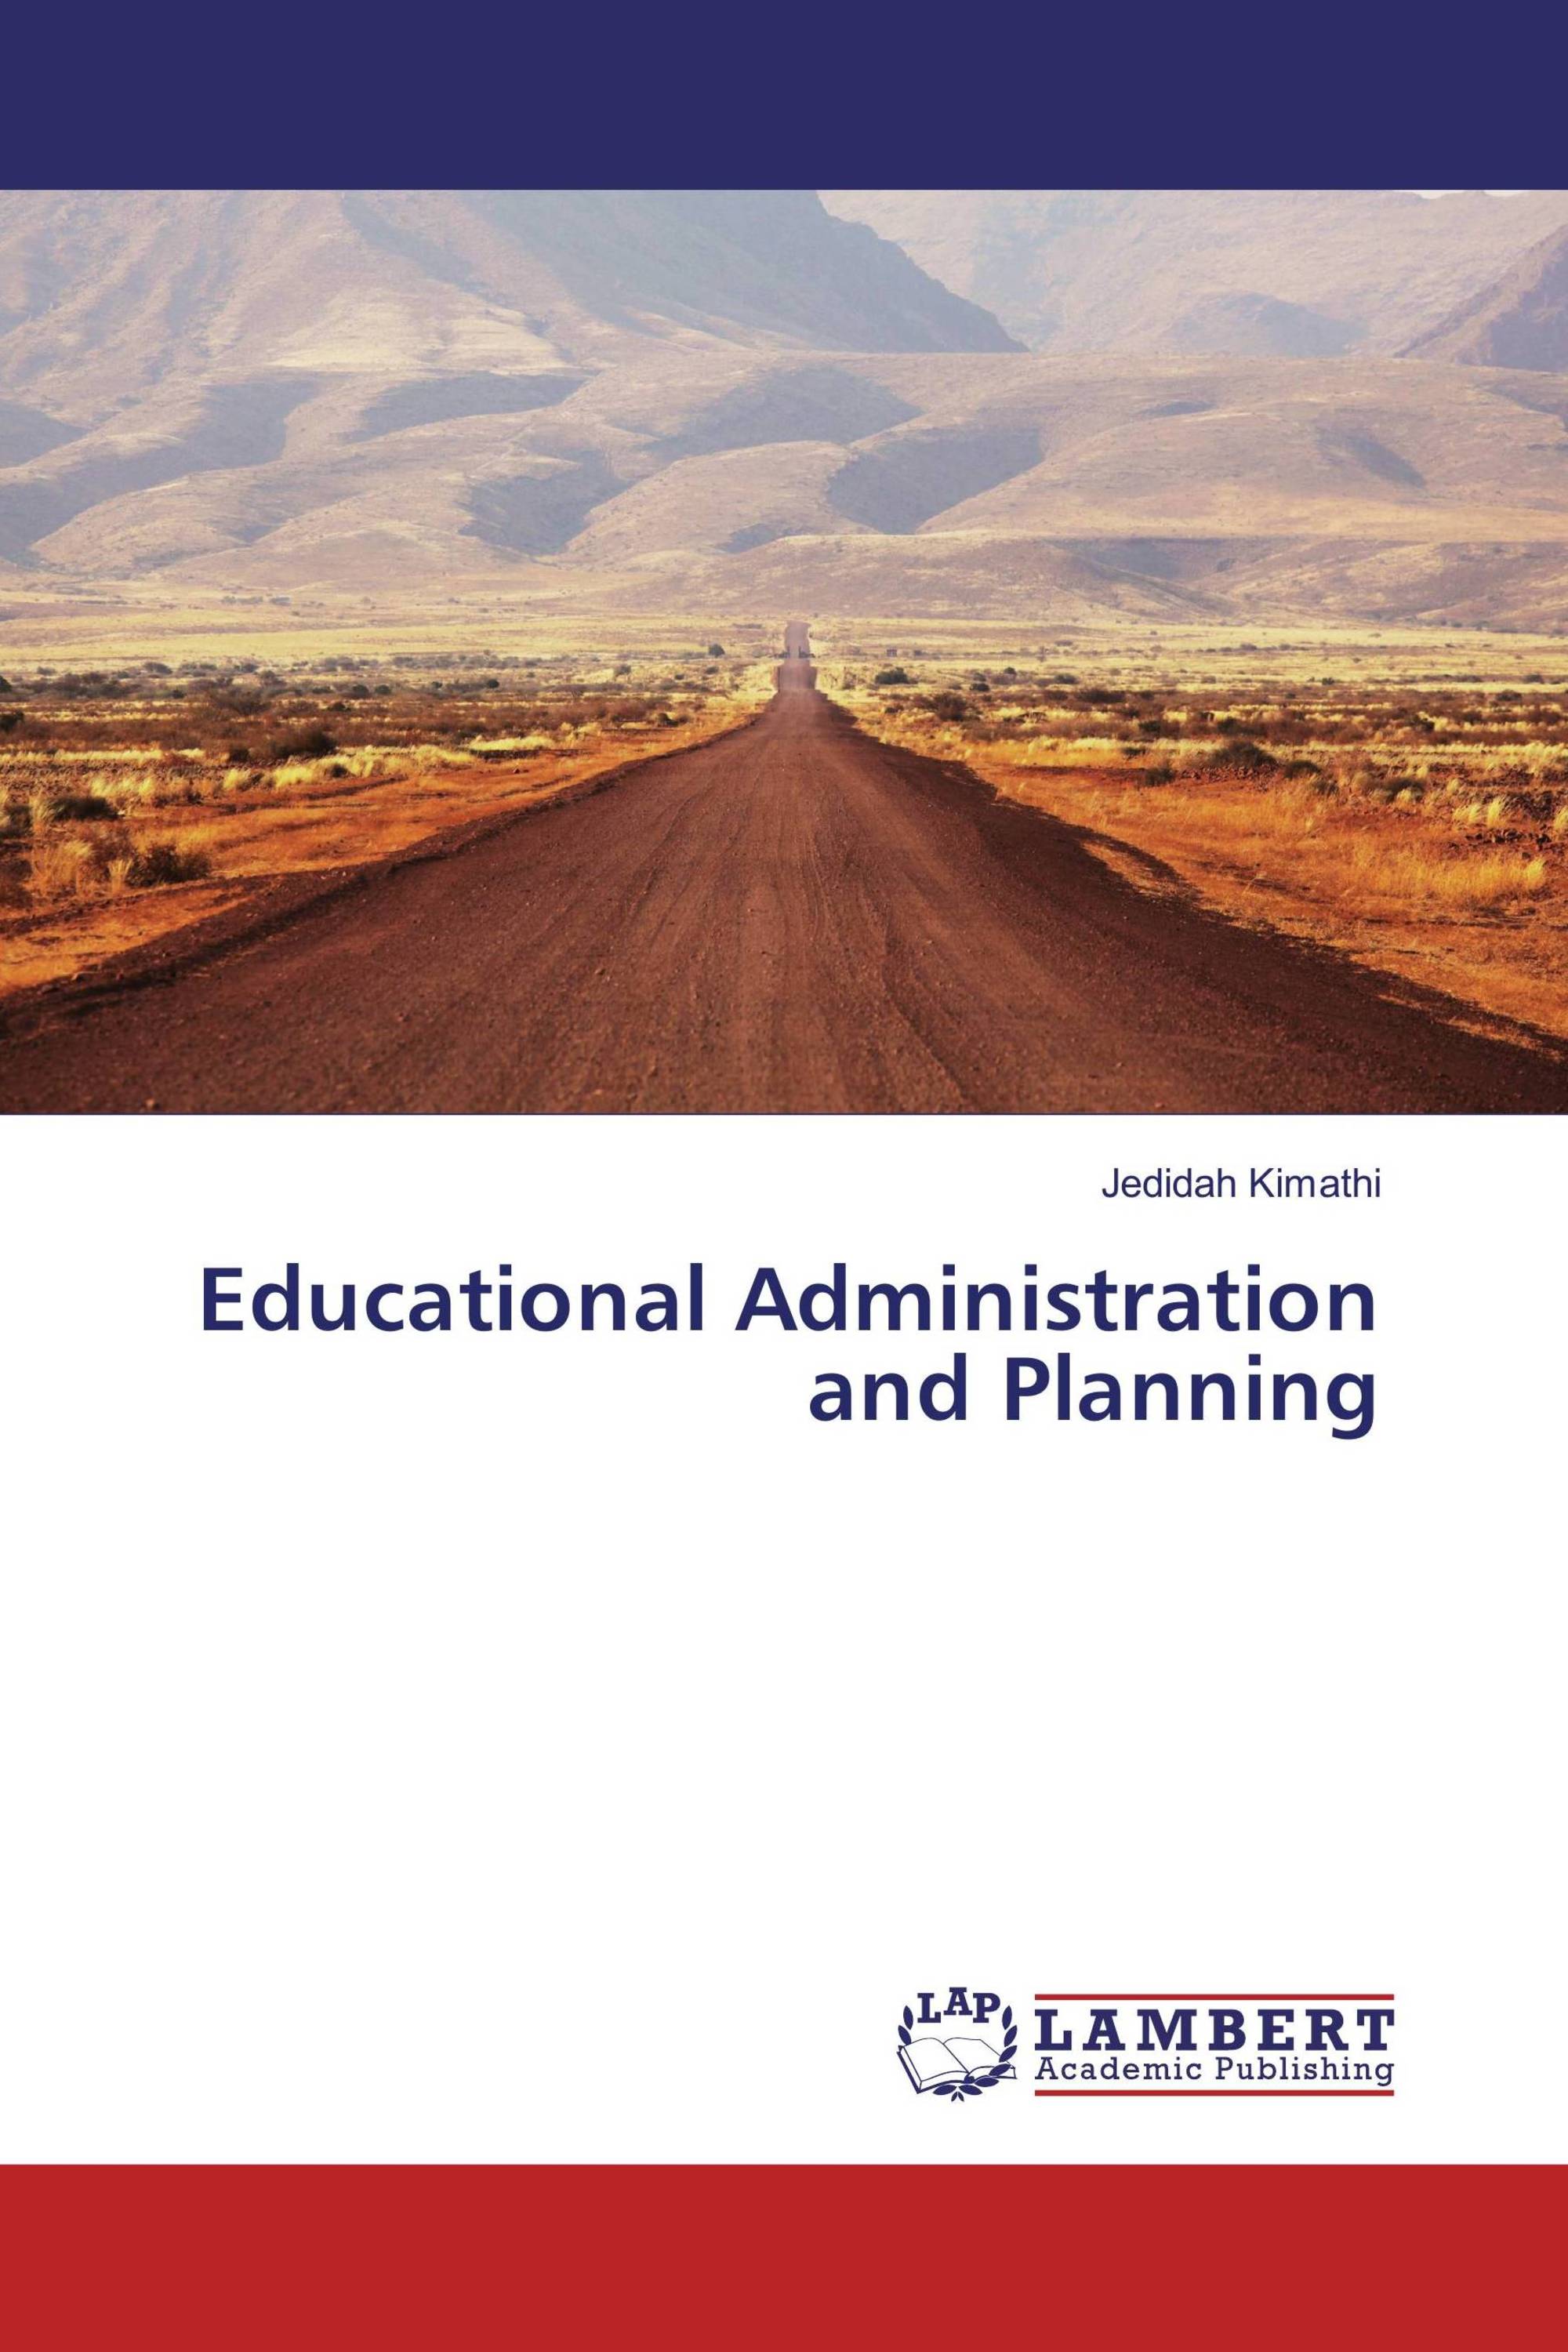 masters project topics on educational administration and planning